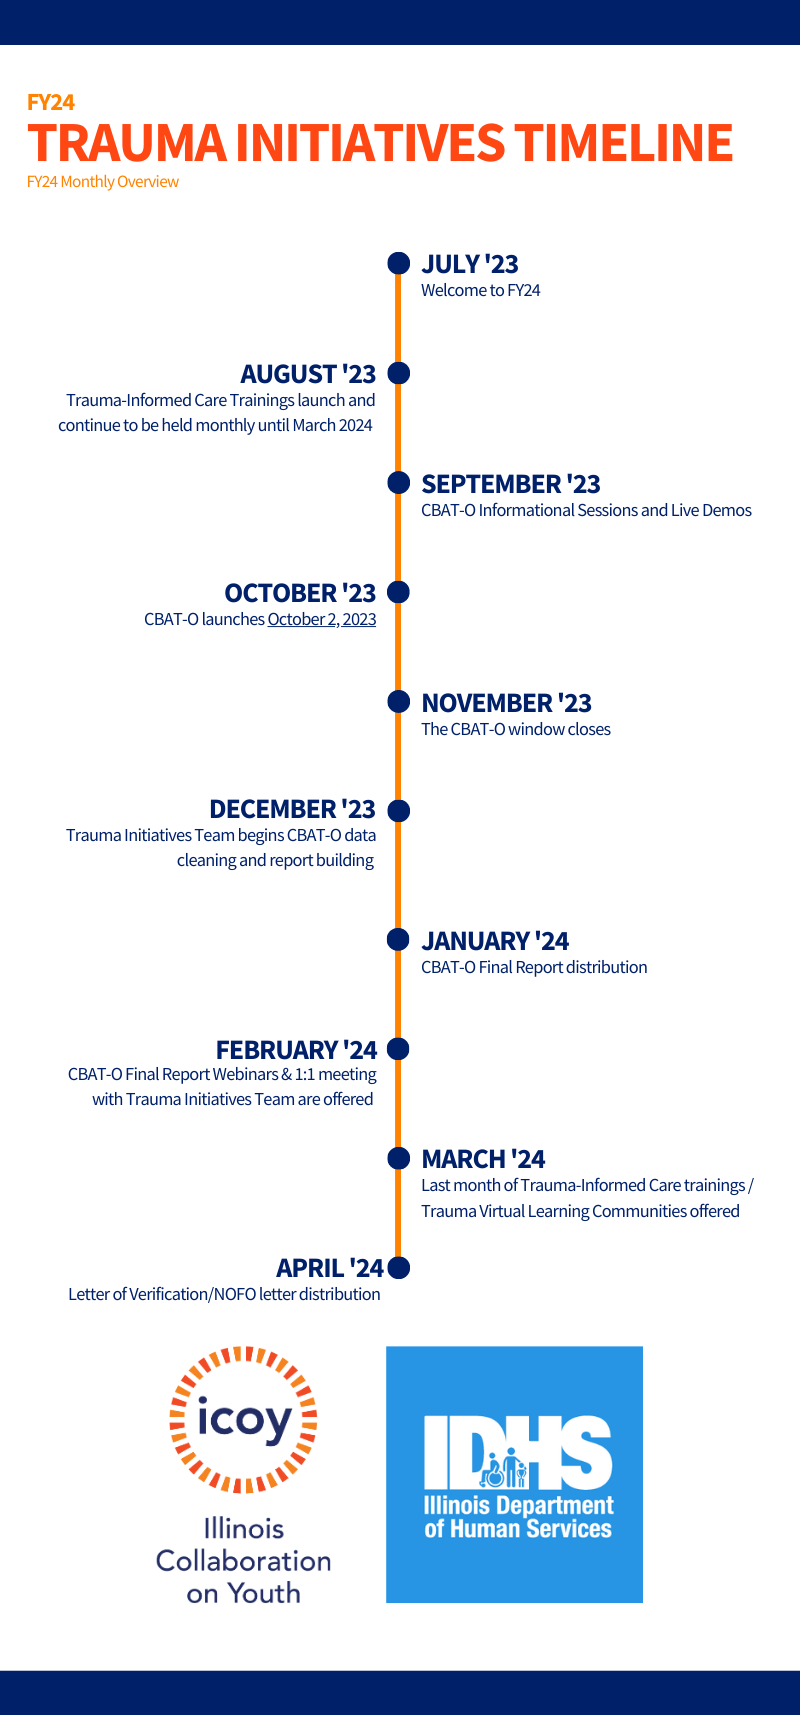 Include FY24 Timeline Graphic: July – Welcome to FY24 August- Trauma-Informed Care Trainings launch offered monthly until March 2024 September- Capacity Building Assessment Tool for Organizations (CBAT-O) Informational Sessions and Live Demos October – CBAT-O launches October 2, 2023 November – CBAT-O closes December- Trauma Initiatives Team begins CBAT-O data cleaning and report building January – CBAT-O Final Report distribution February – CBAT-O Final Report Webinars & Launch of 1:1 meeting with Trauma Initiatives Team March – Last month of Trauma-Informed Care trainings offered in FY24. Launch of Trauma Virtual Learning Communities April – Letter of Verification/NOFO letter distribution